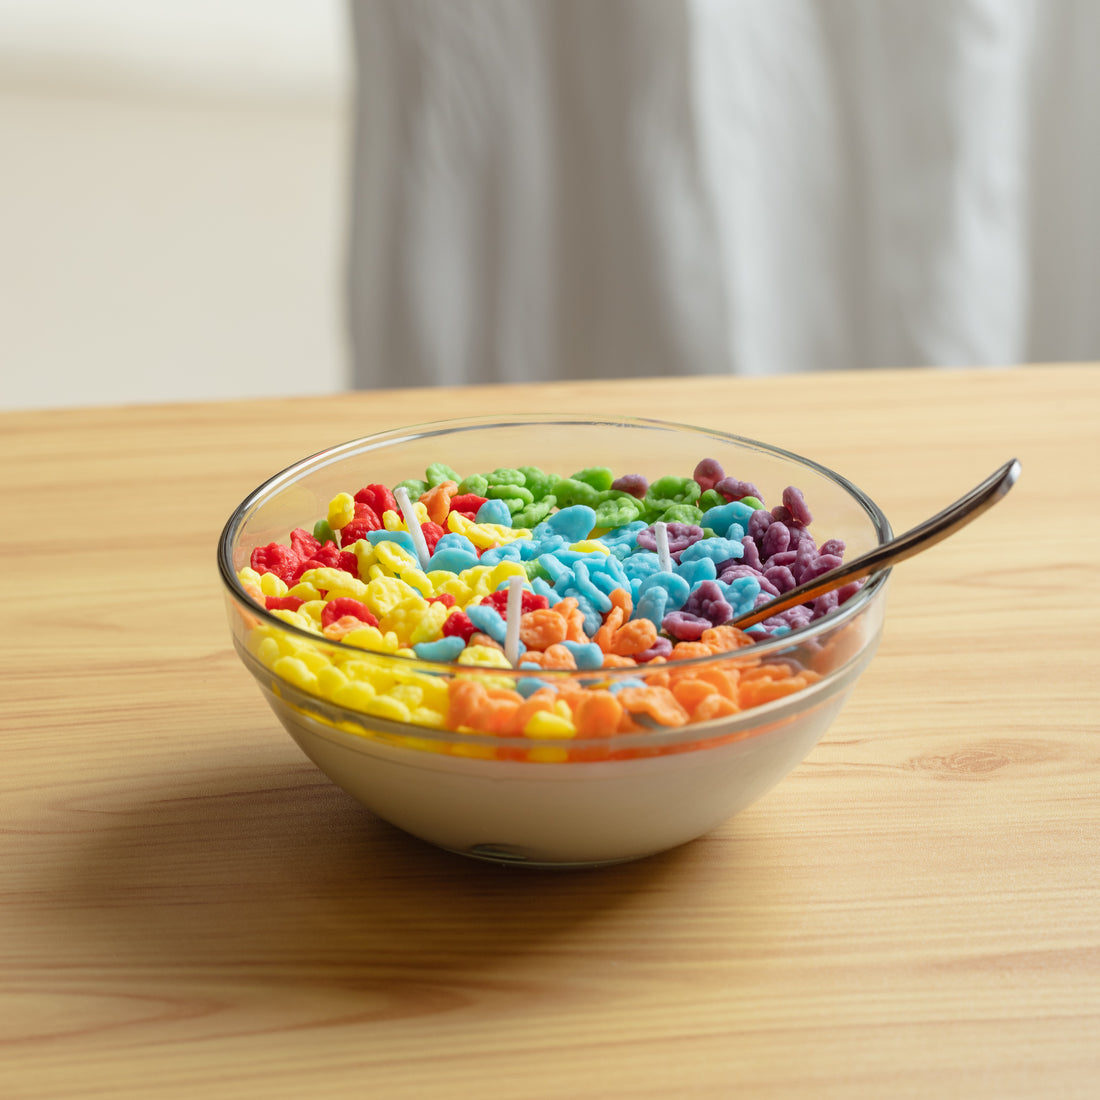 Get a natural scents of Fruity Pebbles Cereal Bowl Scented Candle  in your home.